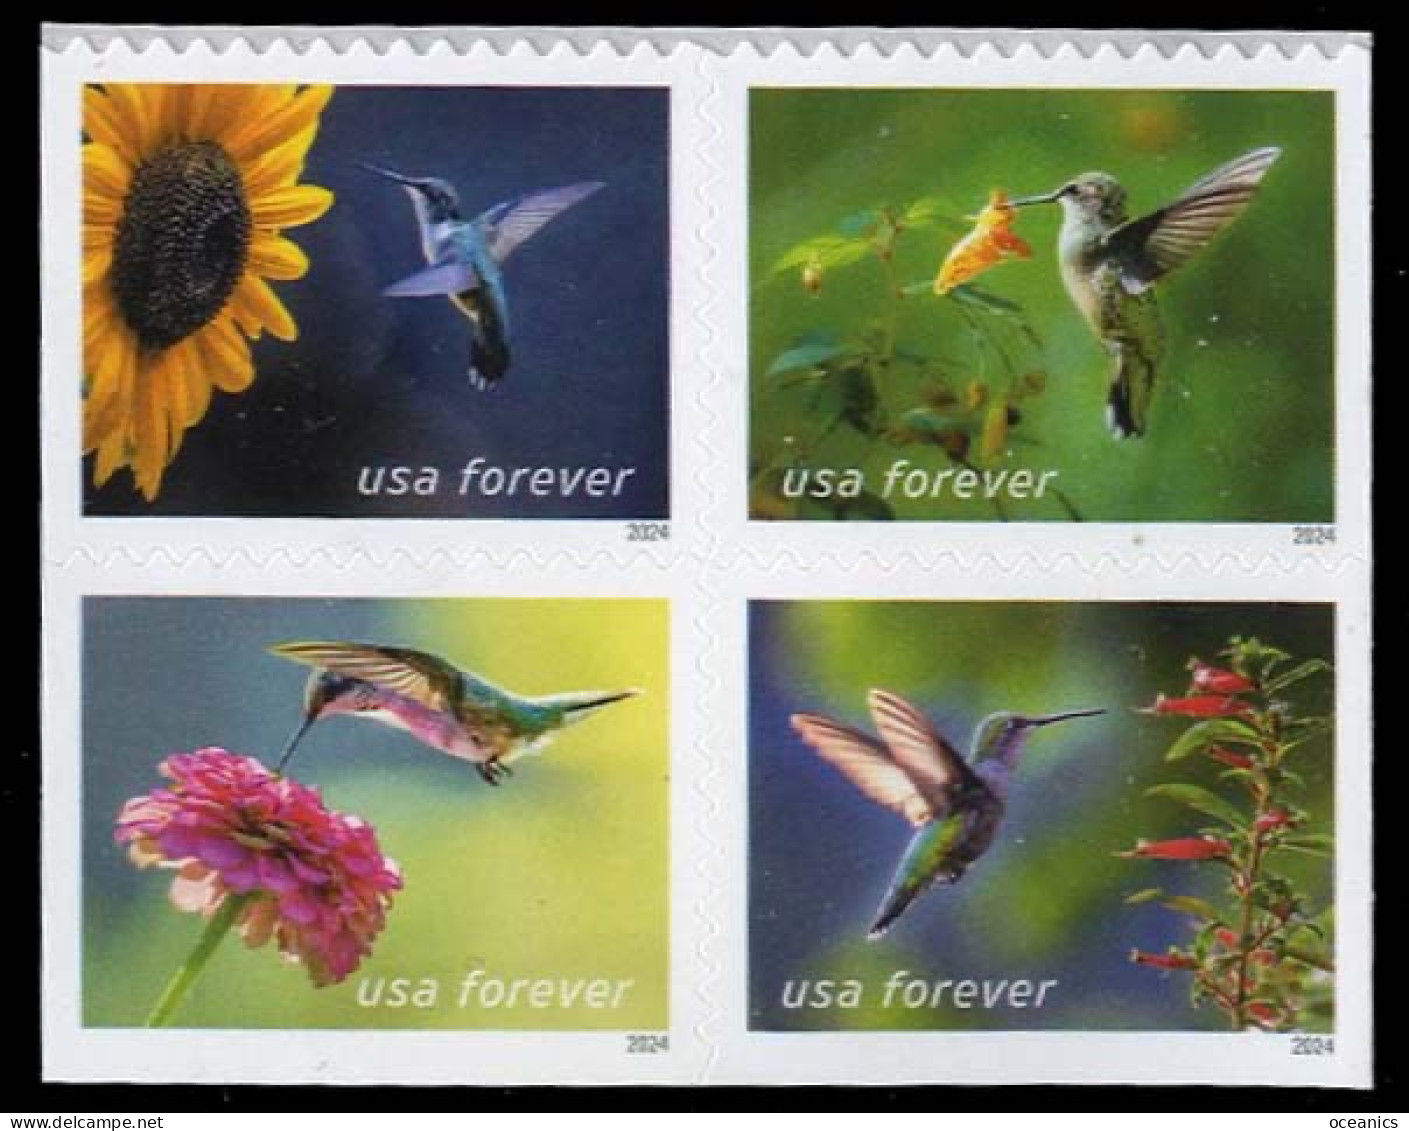 Etats-Unis / United States (Scott No.5848a - Garden Delights Forever Stamps) [**] Bloc Of 4 - Unused Stamps